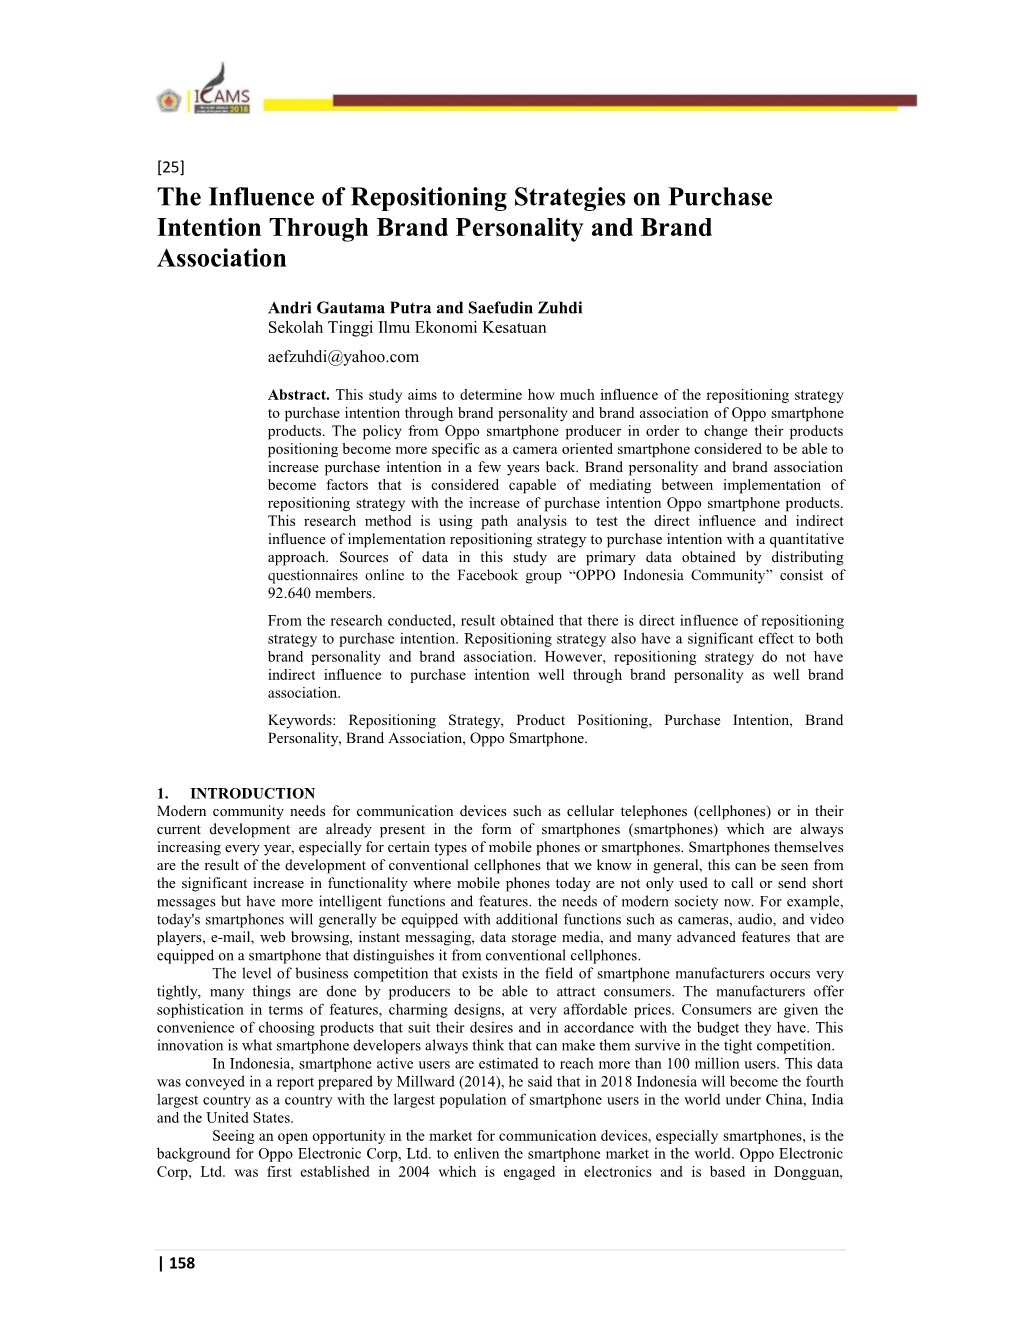 The Influence of Repositioning Strategies on Purchase Intention Through Brand Personality and Brand Association